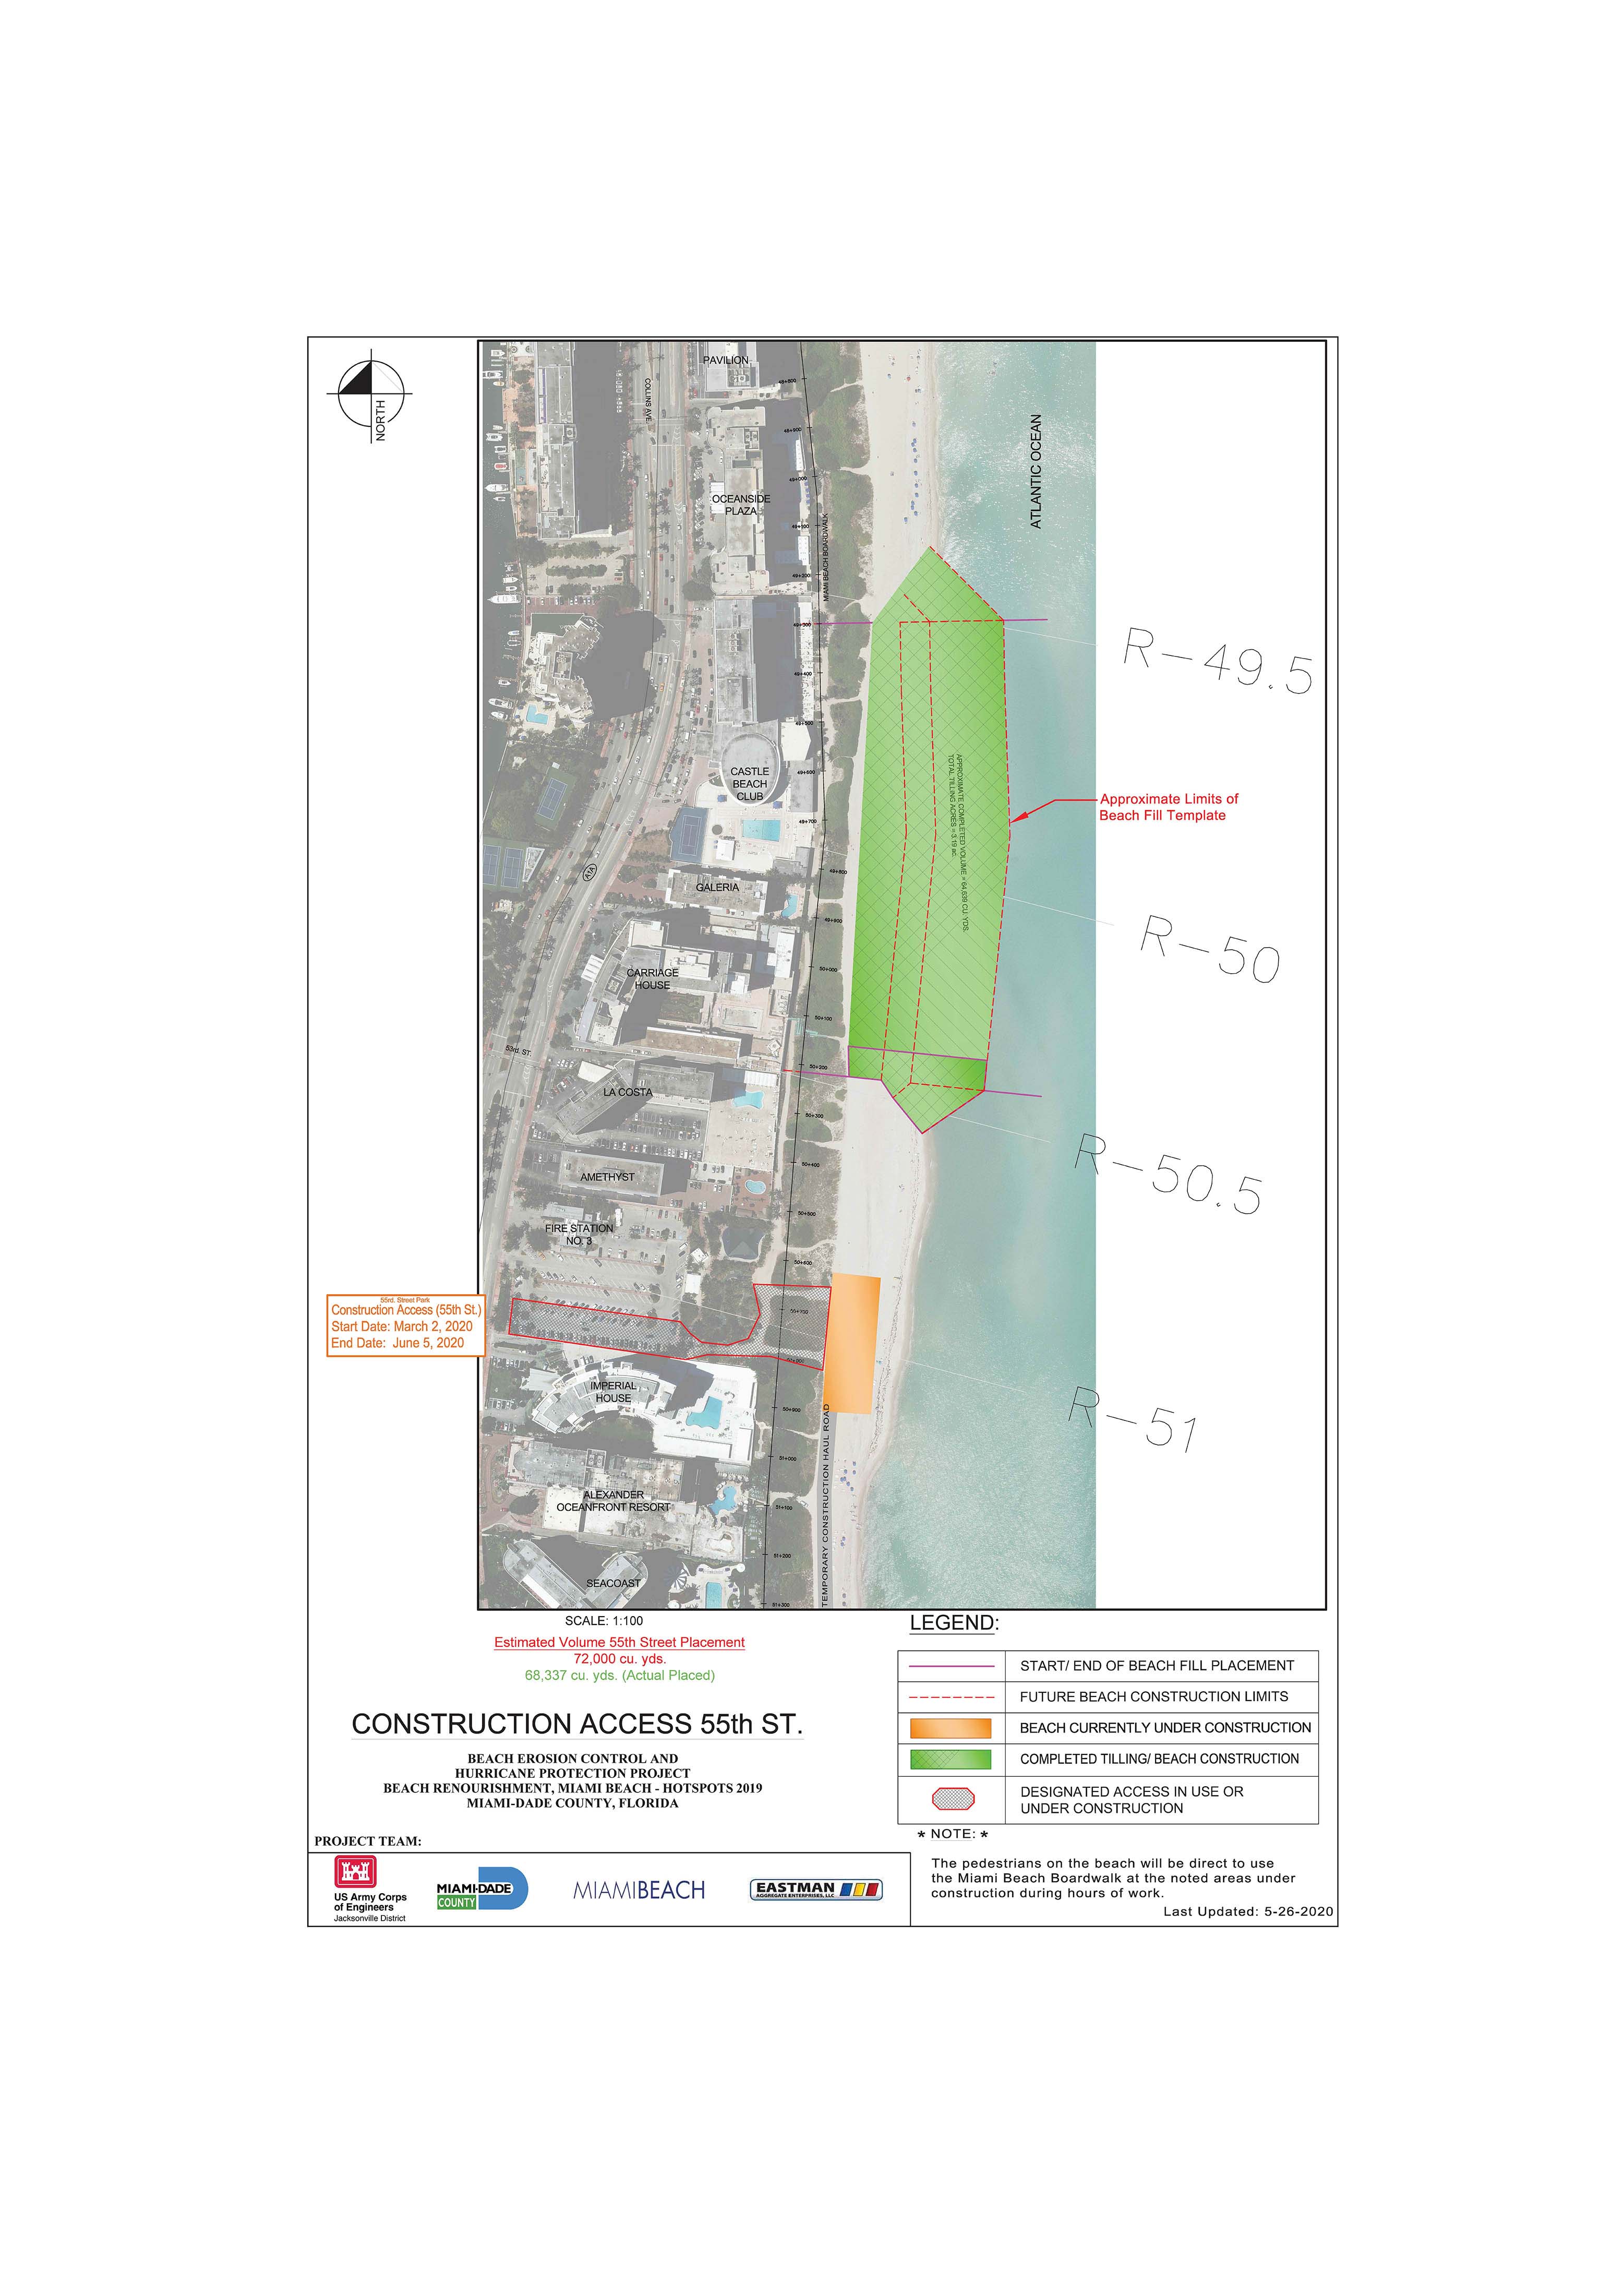 Image showing the 55th Street Reach where construction is scheduled to end by May 29. Current construction access is through the parking lot near fire station #3 and running south down the beach past the Imperial House, Alexander Oceanfront Resort and Seacoast.